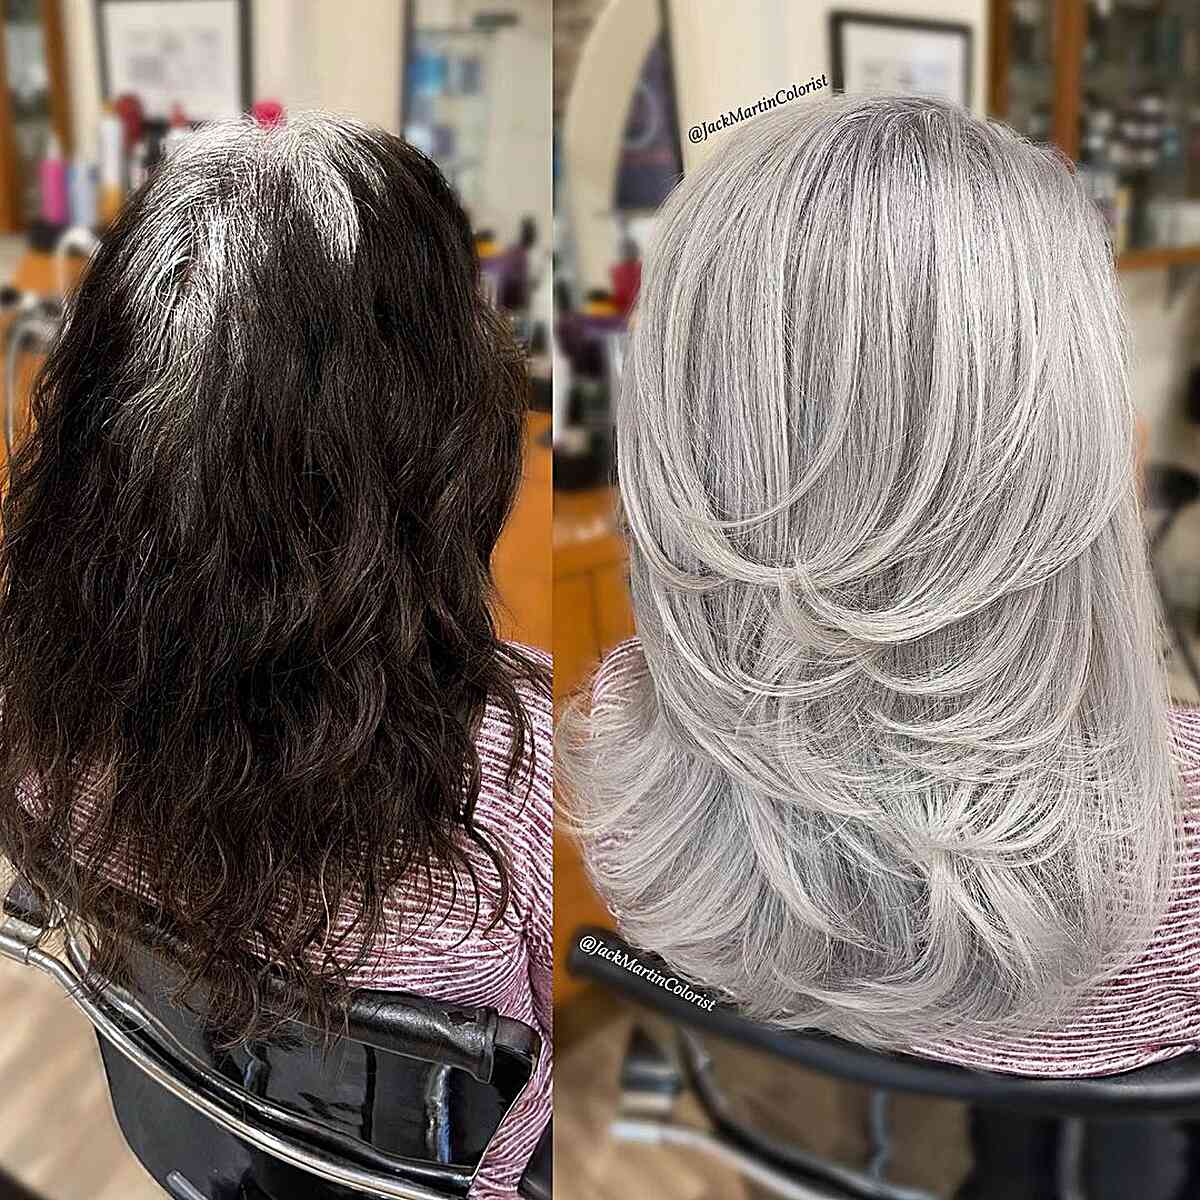 Long Silver Hair with Short Layers for women with damaged hair